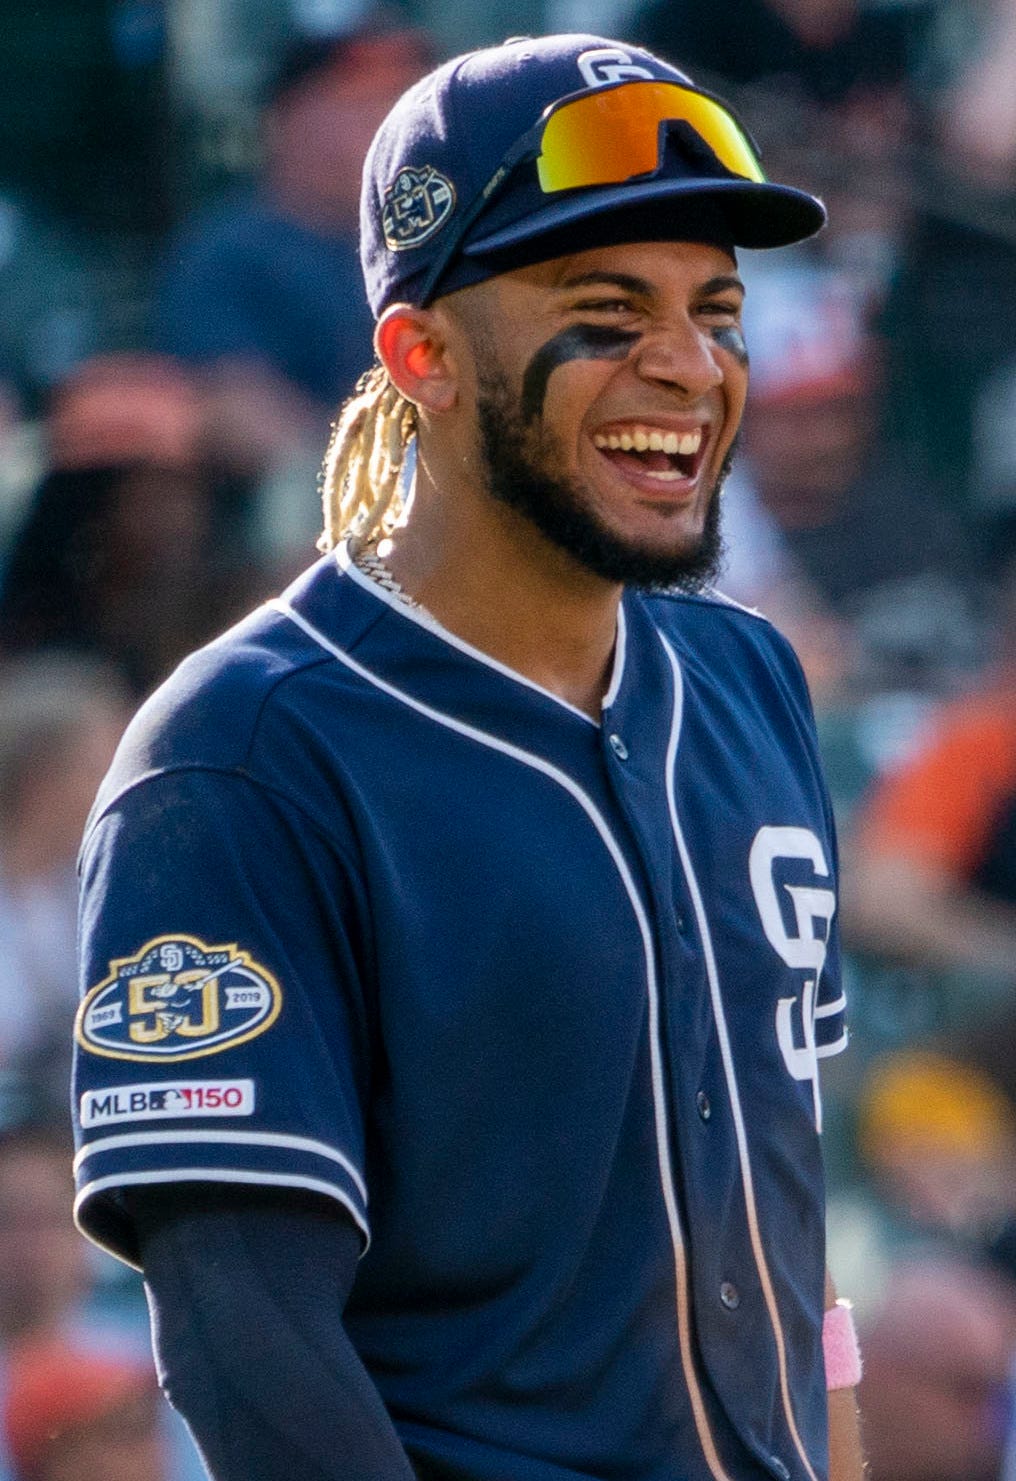 Padres manager: Tatis Jr.'s 'talent is undeniable